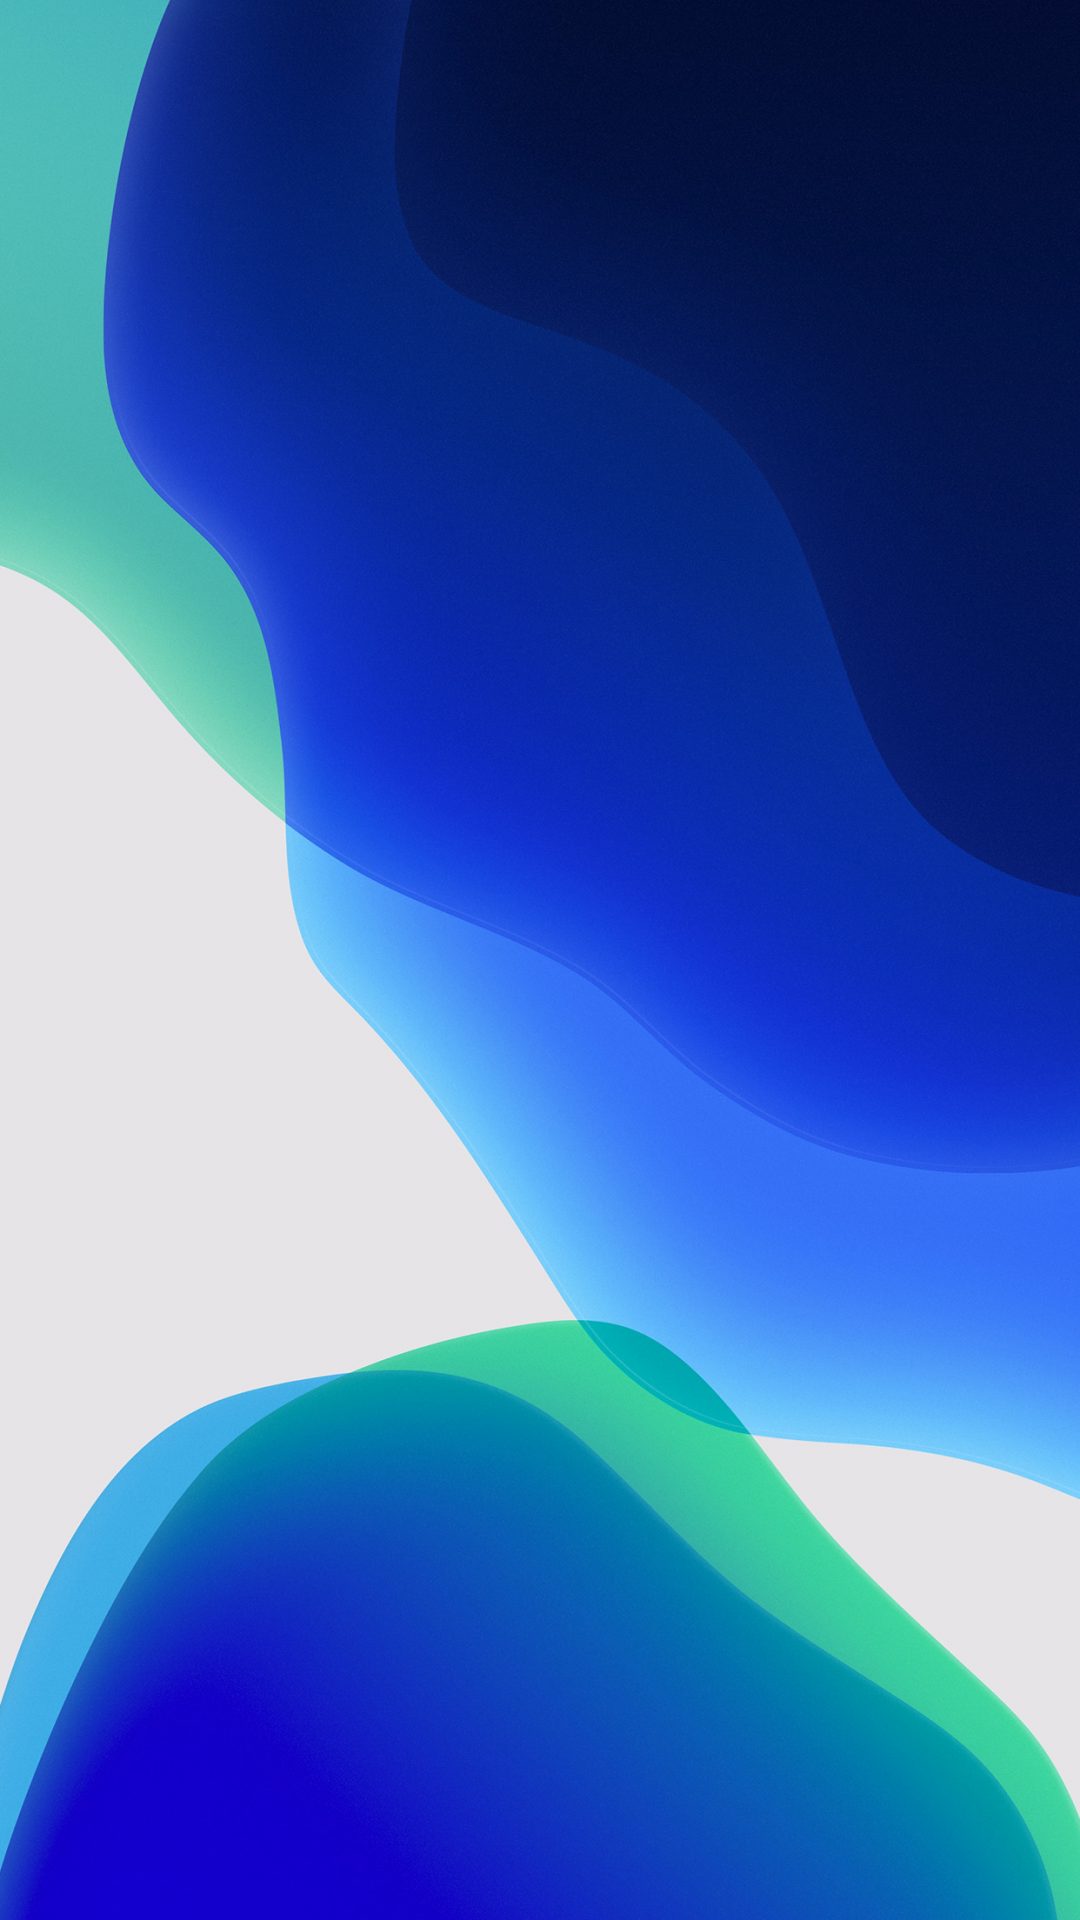 How to Get iOS 13's New Wallpapers for Your iPhone Right Now